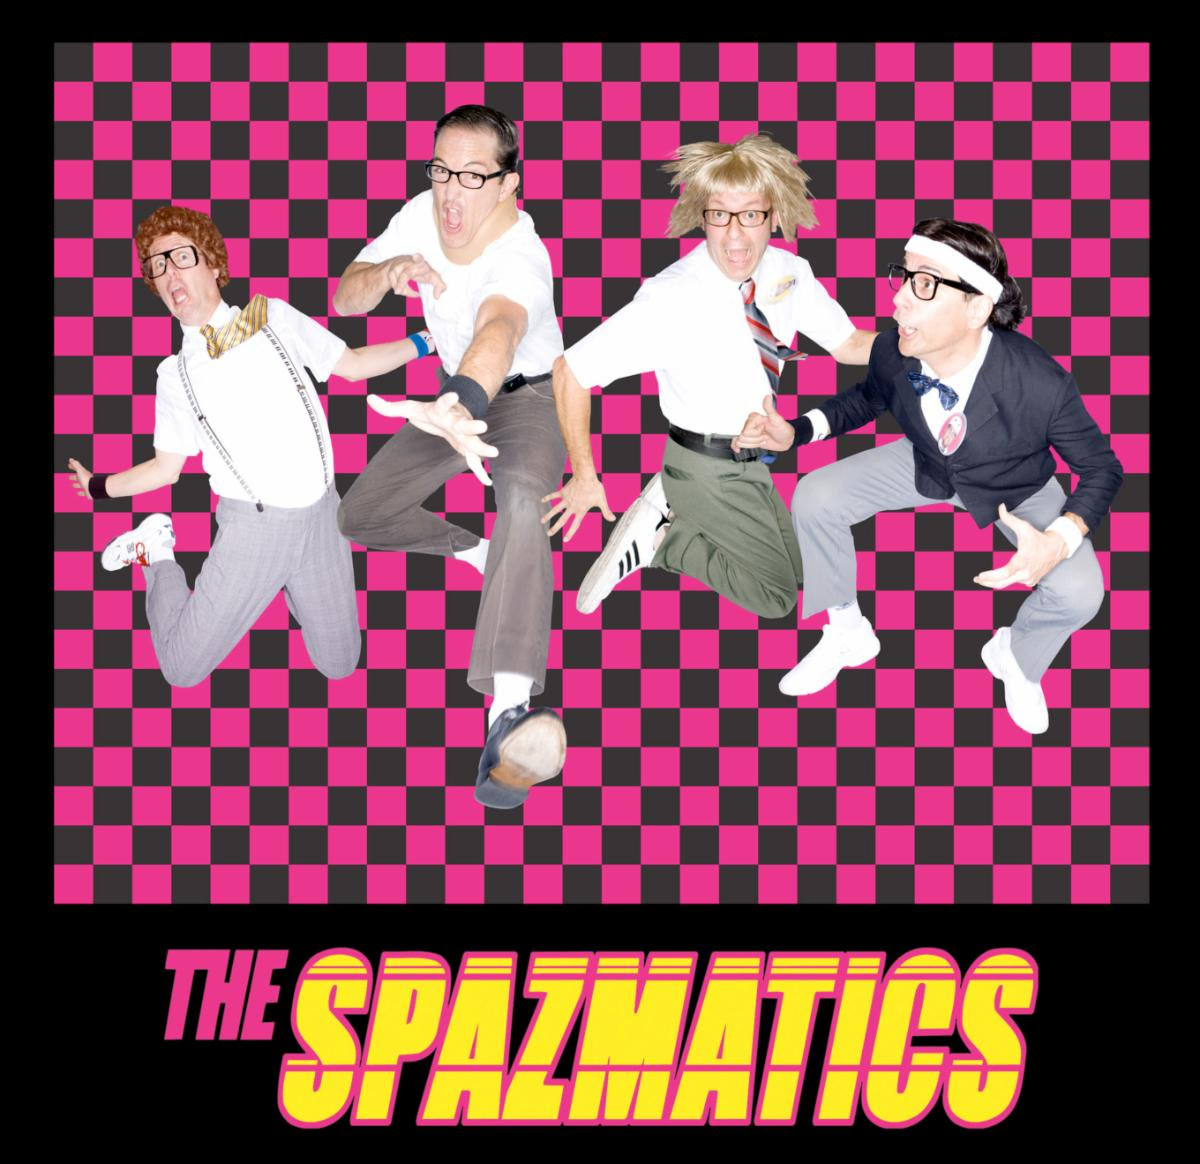 The Spazmatics (80's Hit Cover Band)